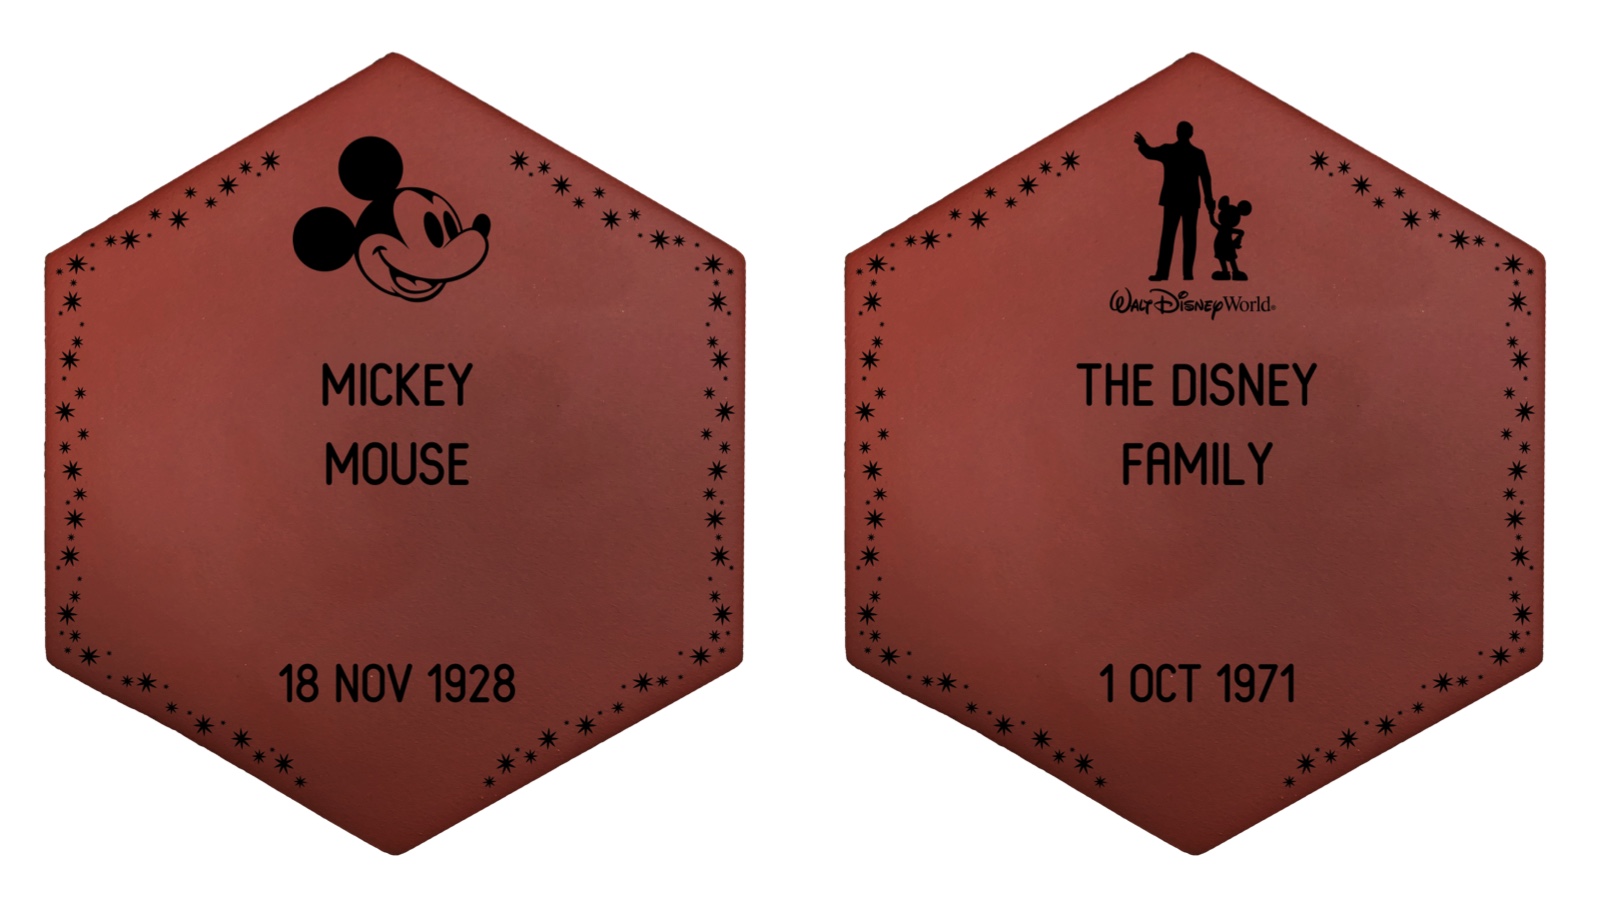 Featured image for “‘Disney’s Walk Around the World’ Bricks to be Retired as Transformation of Arrival Experience Continues at Magic Kingdom Park”